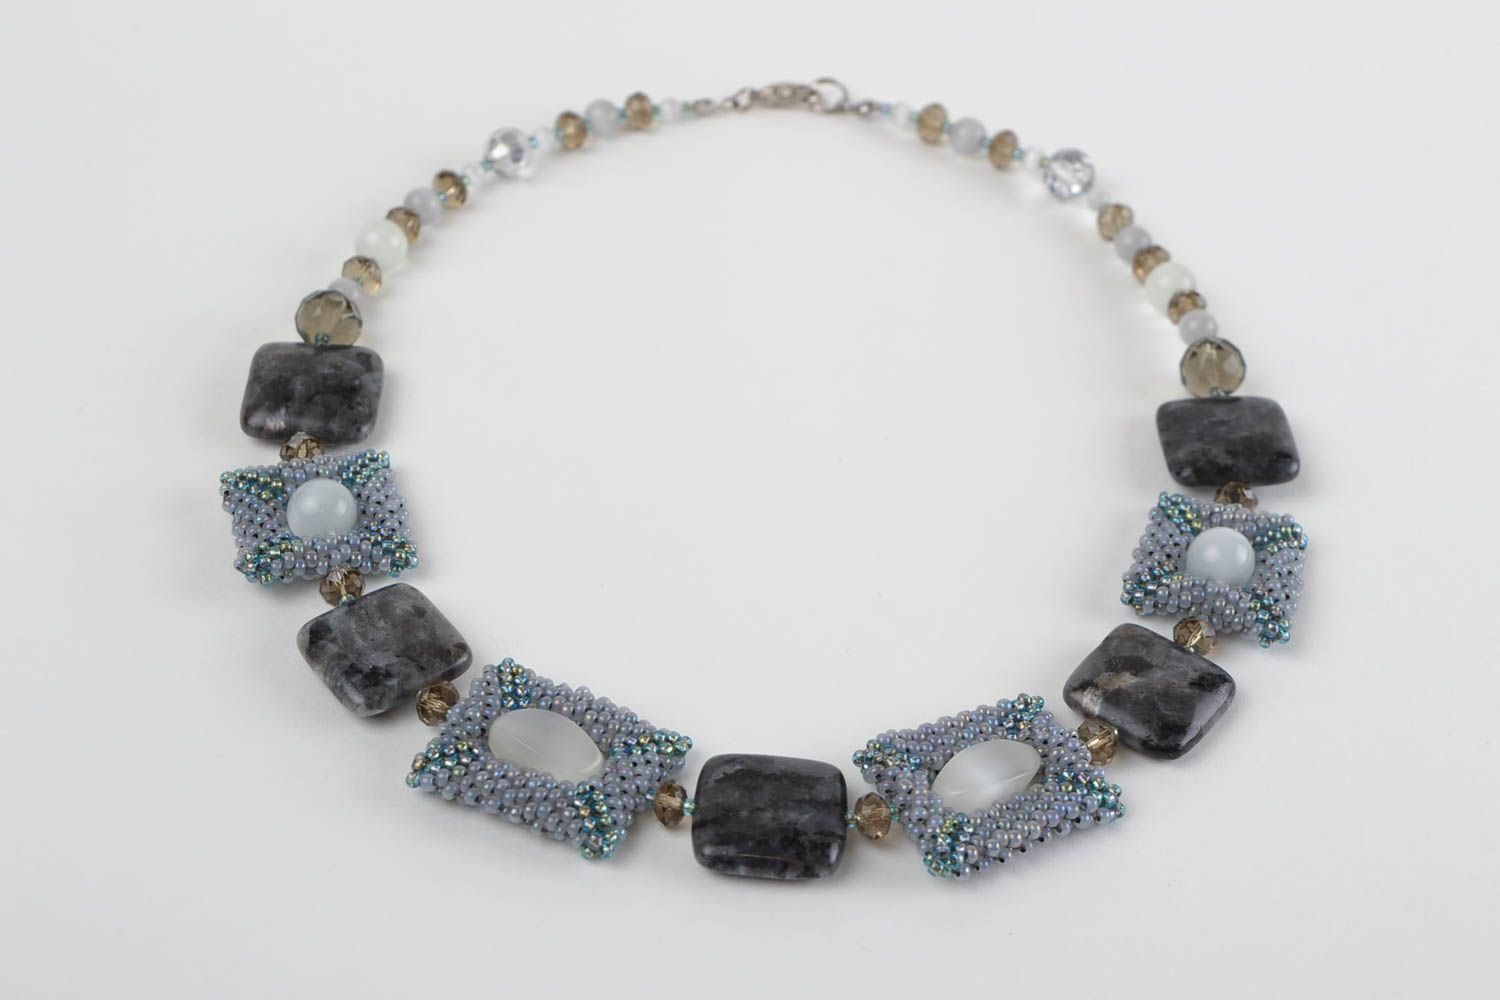 Handmade natural stone and bead woven necklace in severe gray color palette photo 3